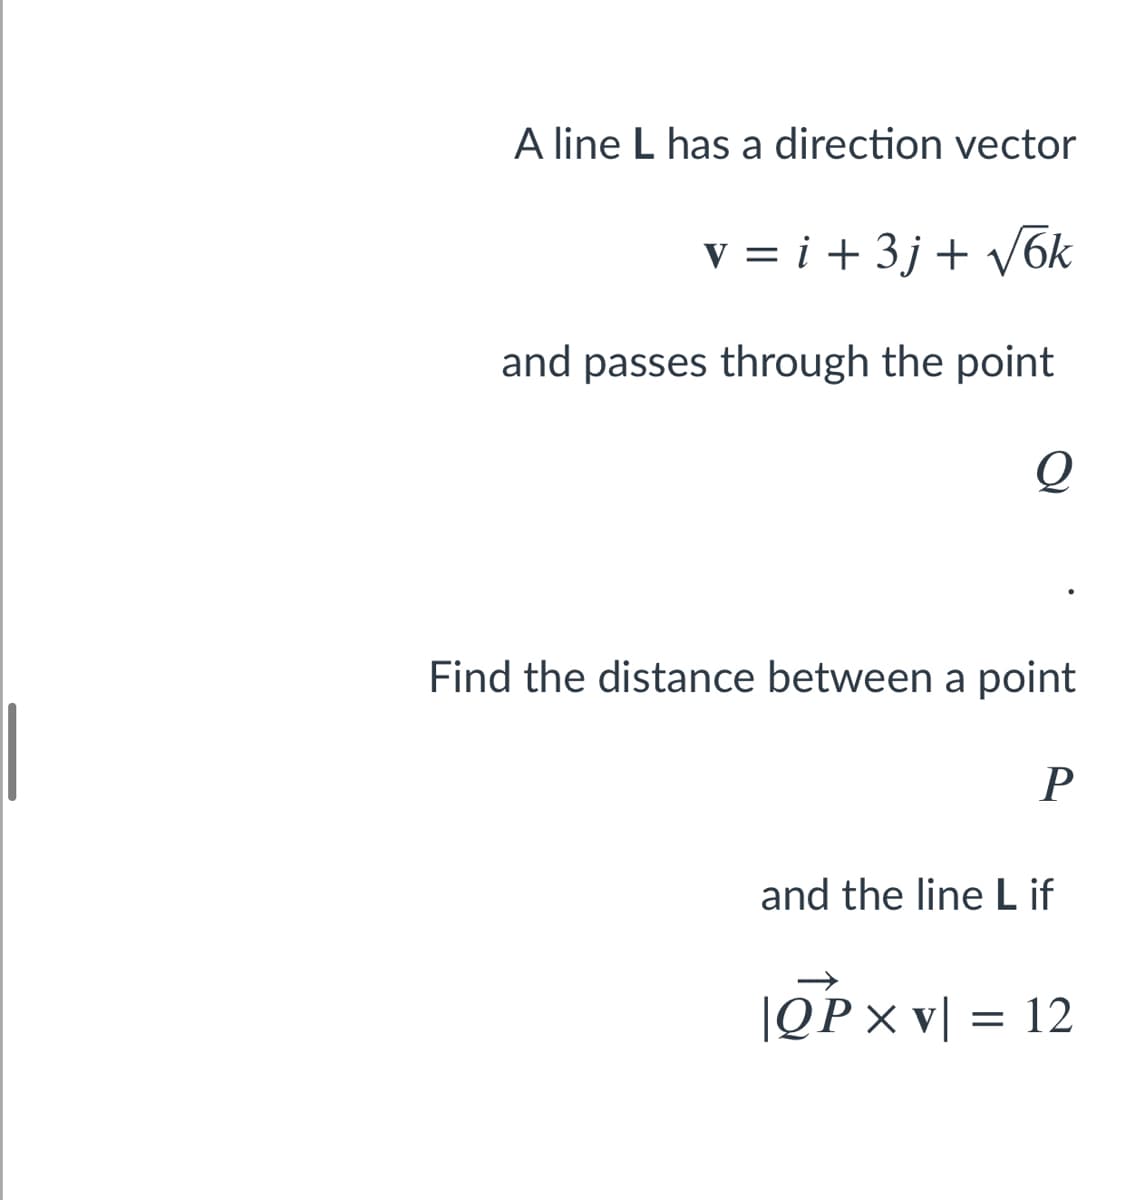 A line L has a direction vector
v = i + 3j + V6k
and passes through the point
Q
Find the distance between a point
and the line L if
|OPx v[ = 12
